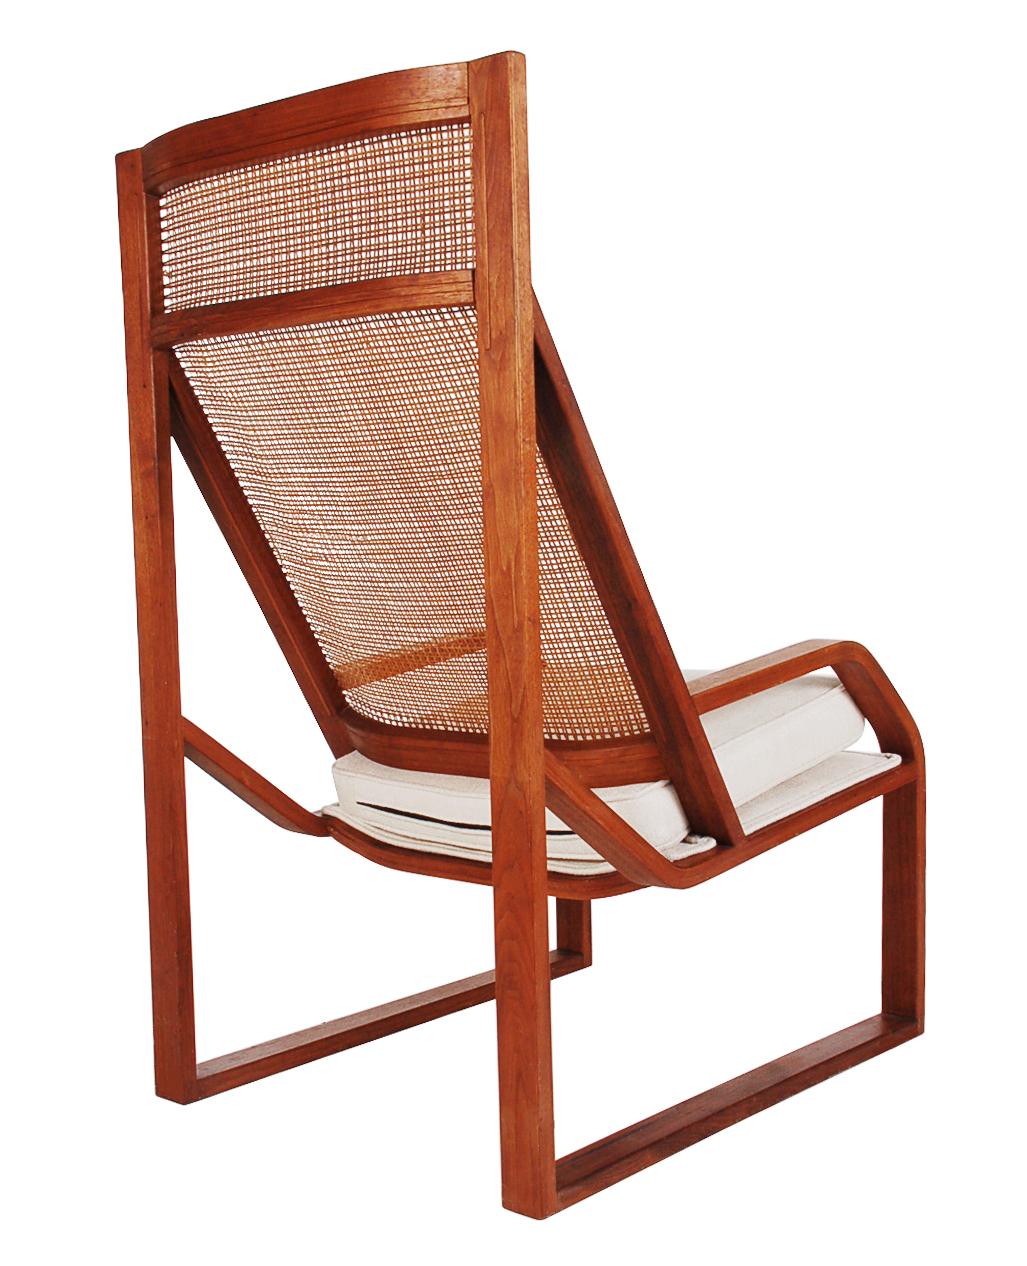 Mid-20th Century Unusual Large Scale Midcentury Danish Modern Cane and Teak Lounge Chair Armchair